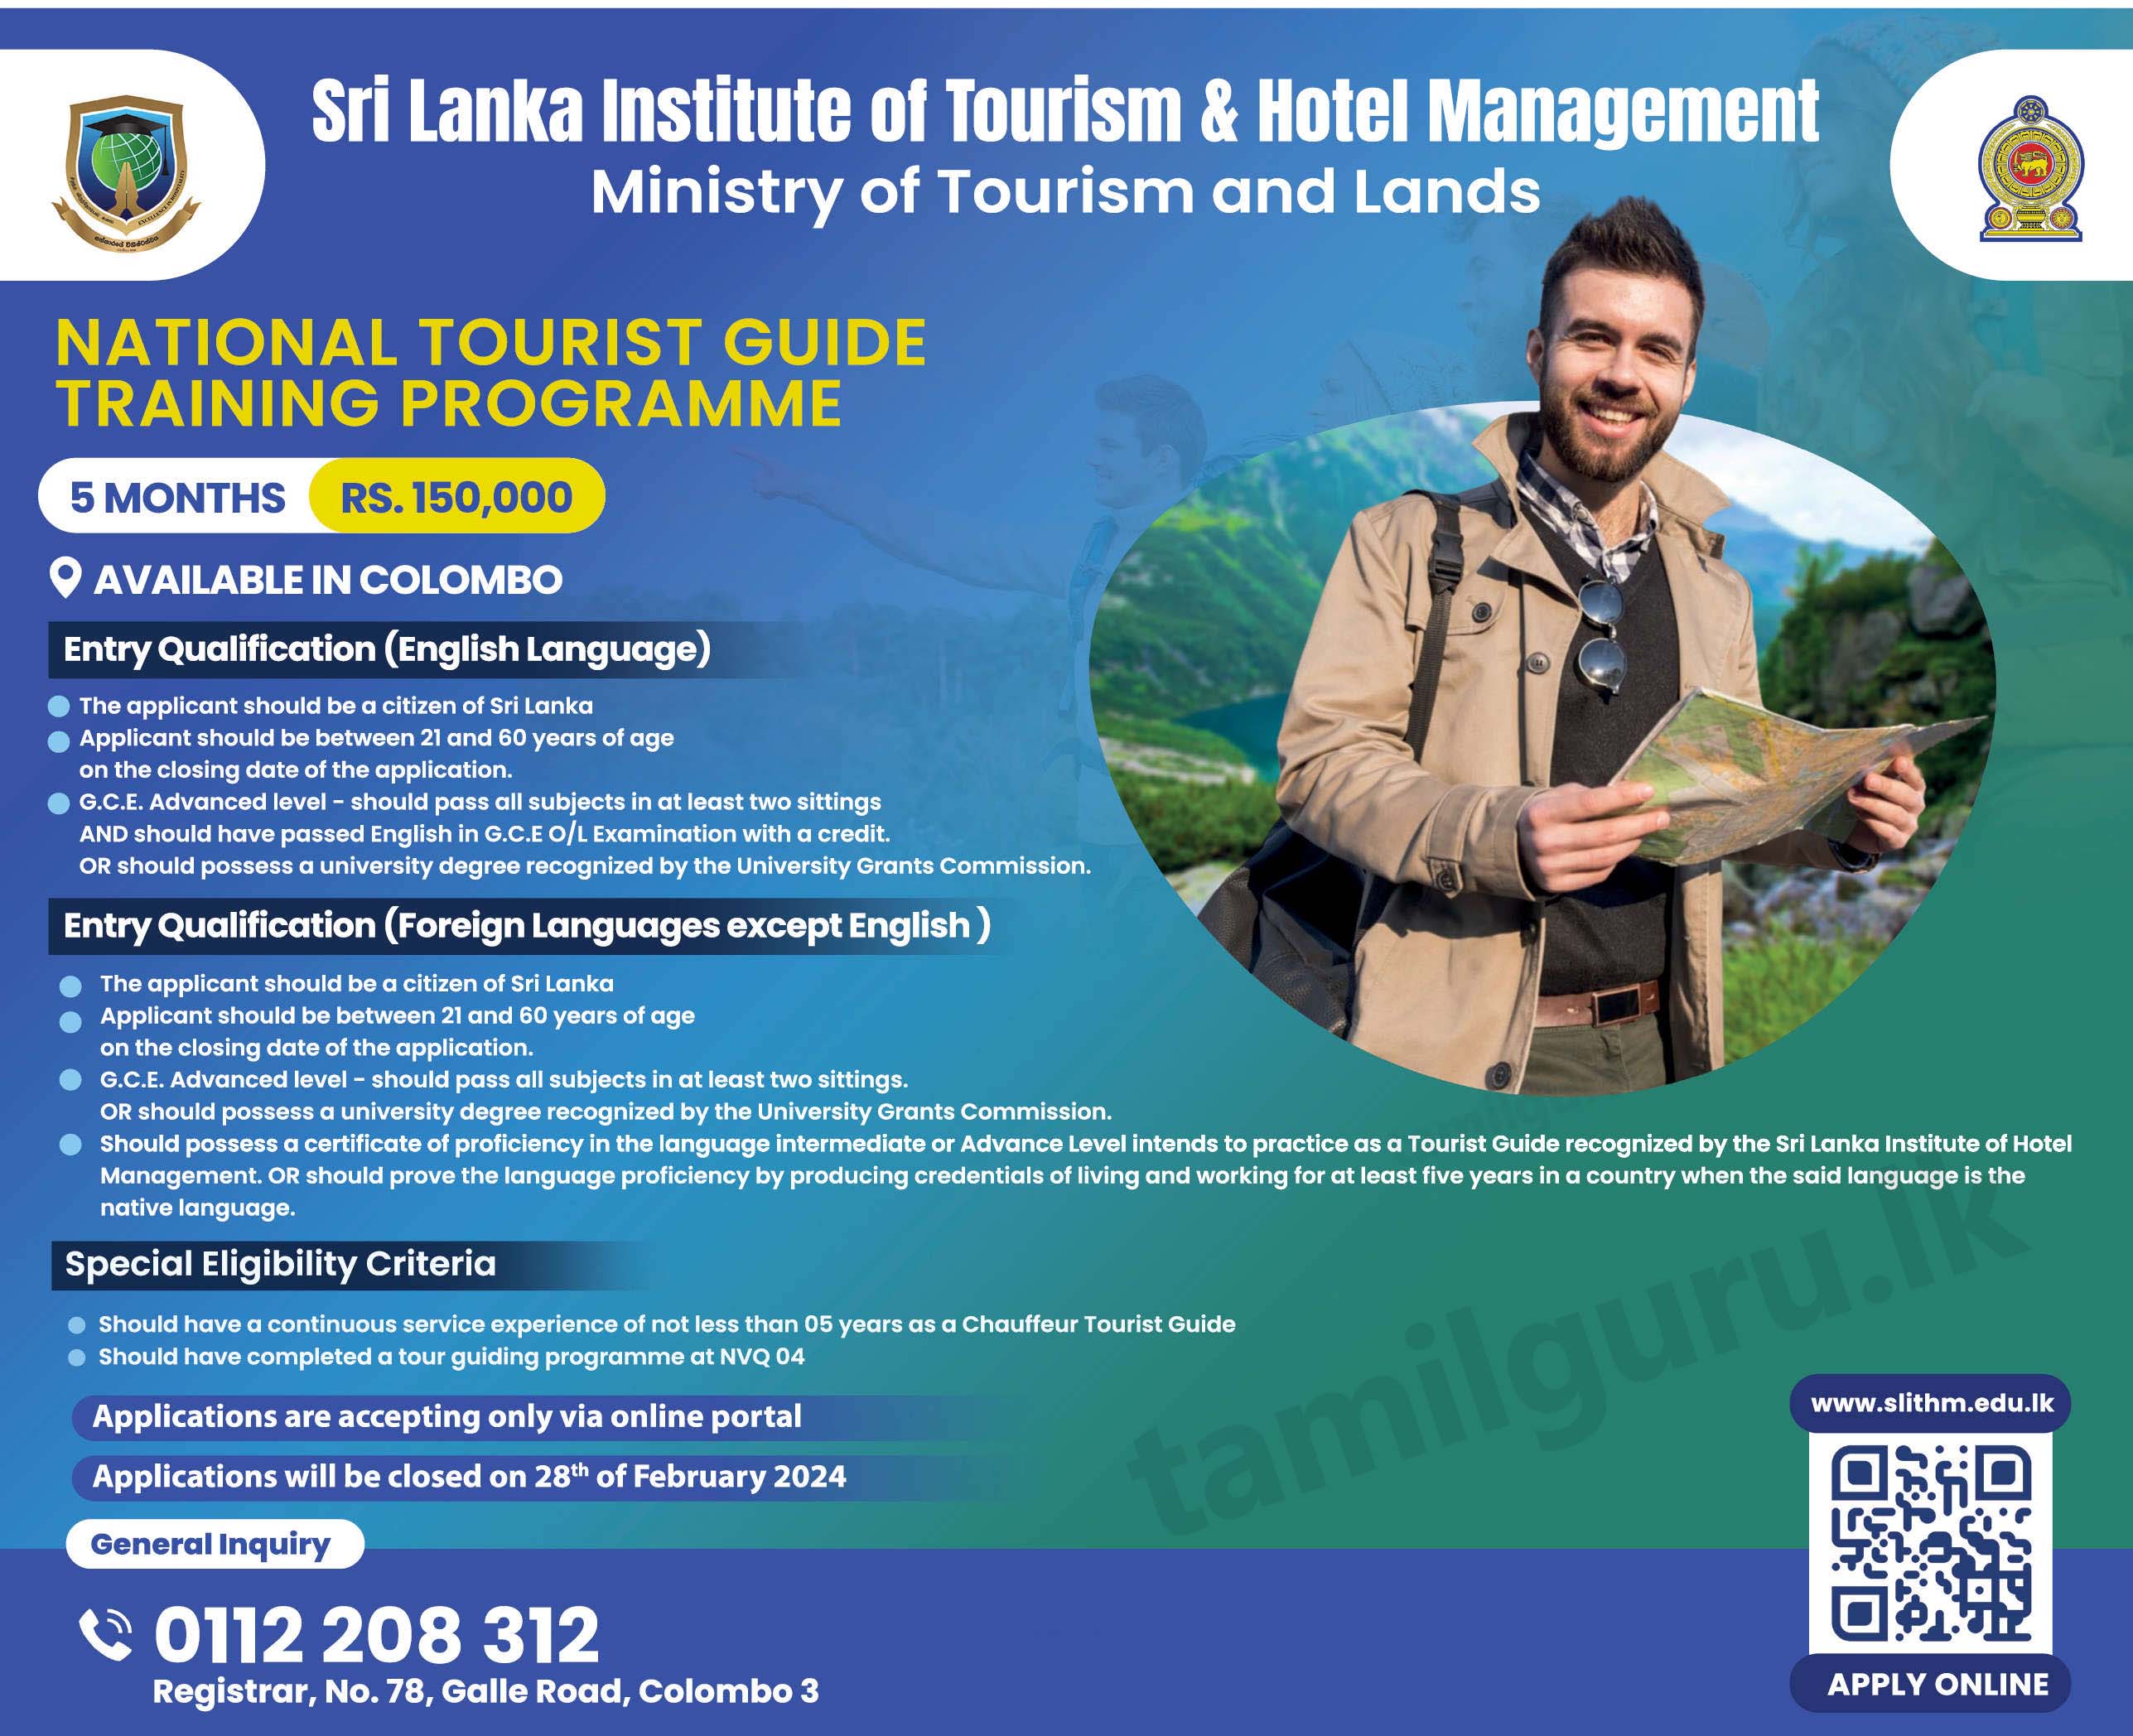 National Tourist Guide Training Programme (Course) 2024 at SLITHM